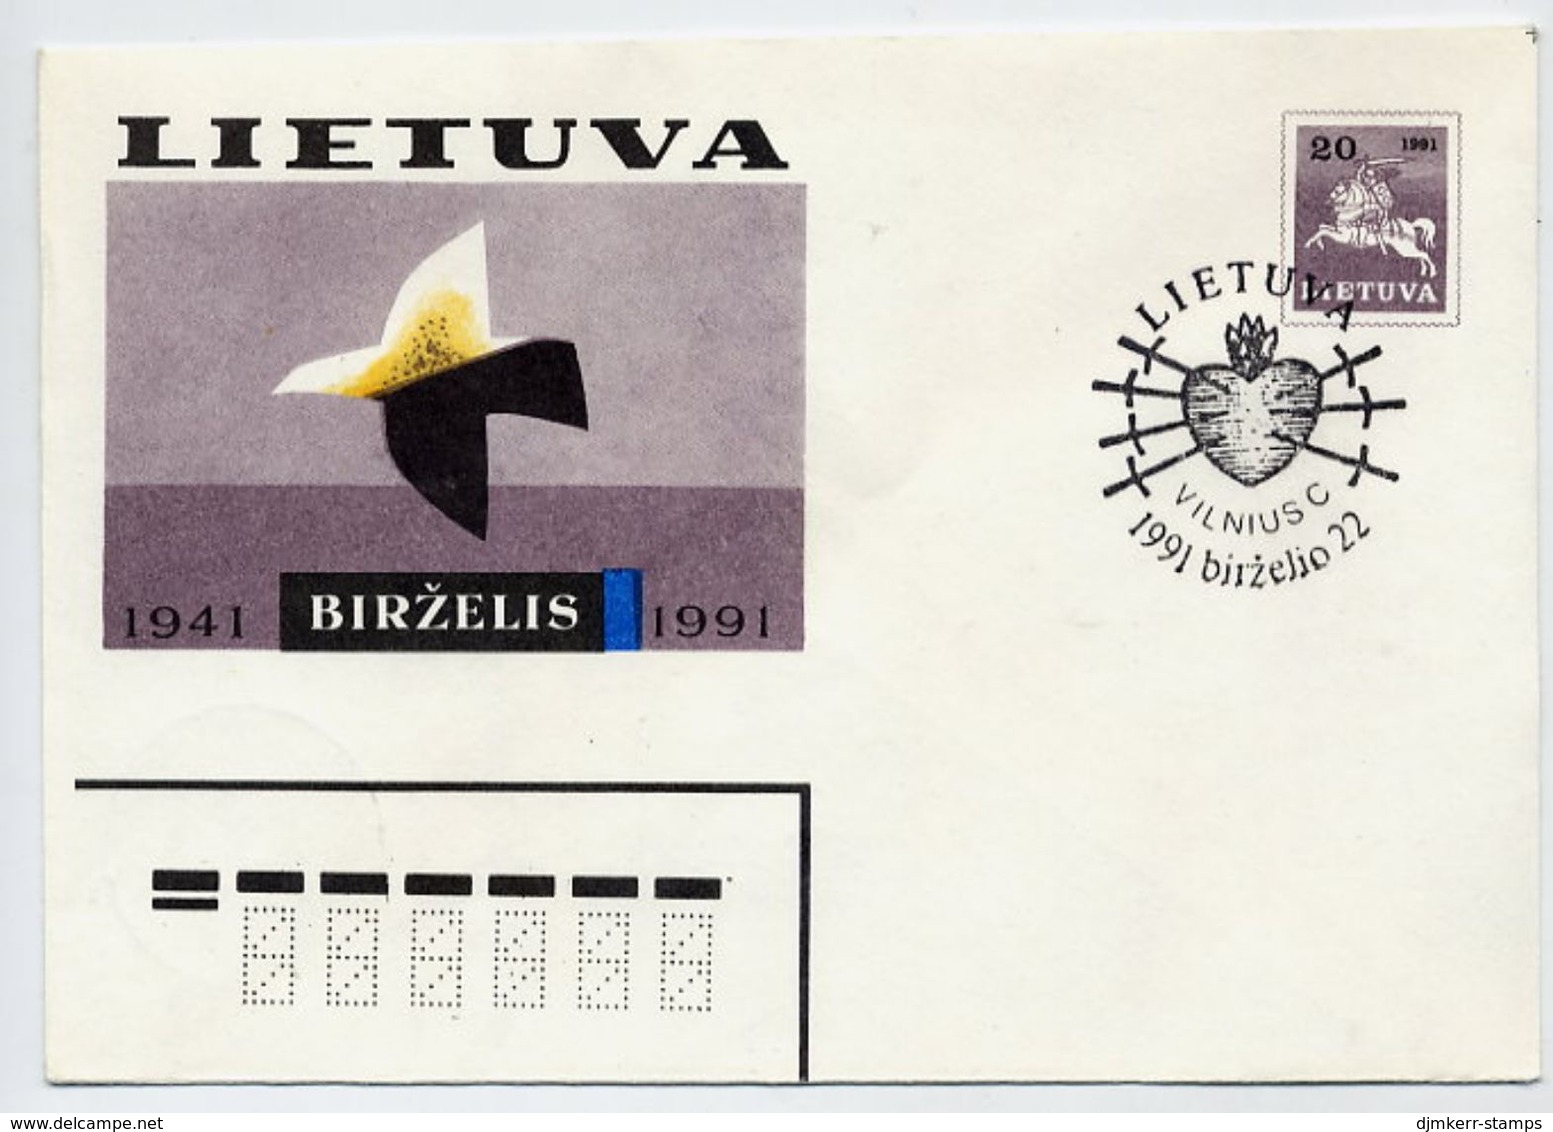 LITHUANIA 1991  Anniversary Of Rising Against The Soviet Union Stationery Envelope, Cancelled.  Michel U11 - Lituanie